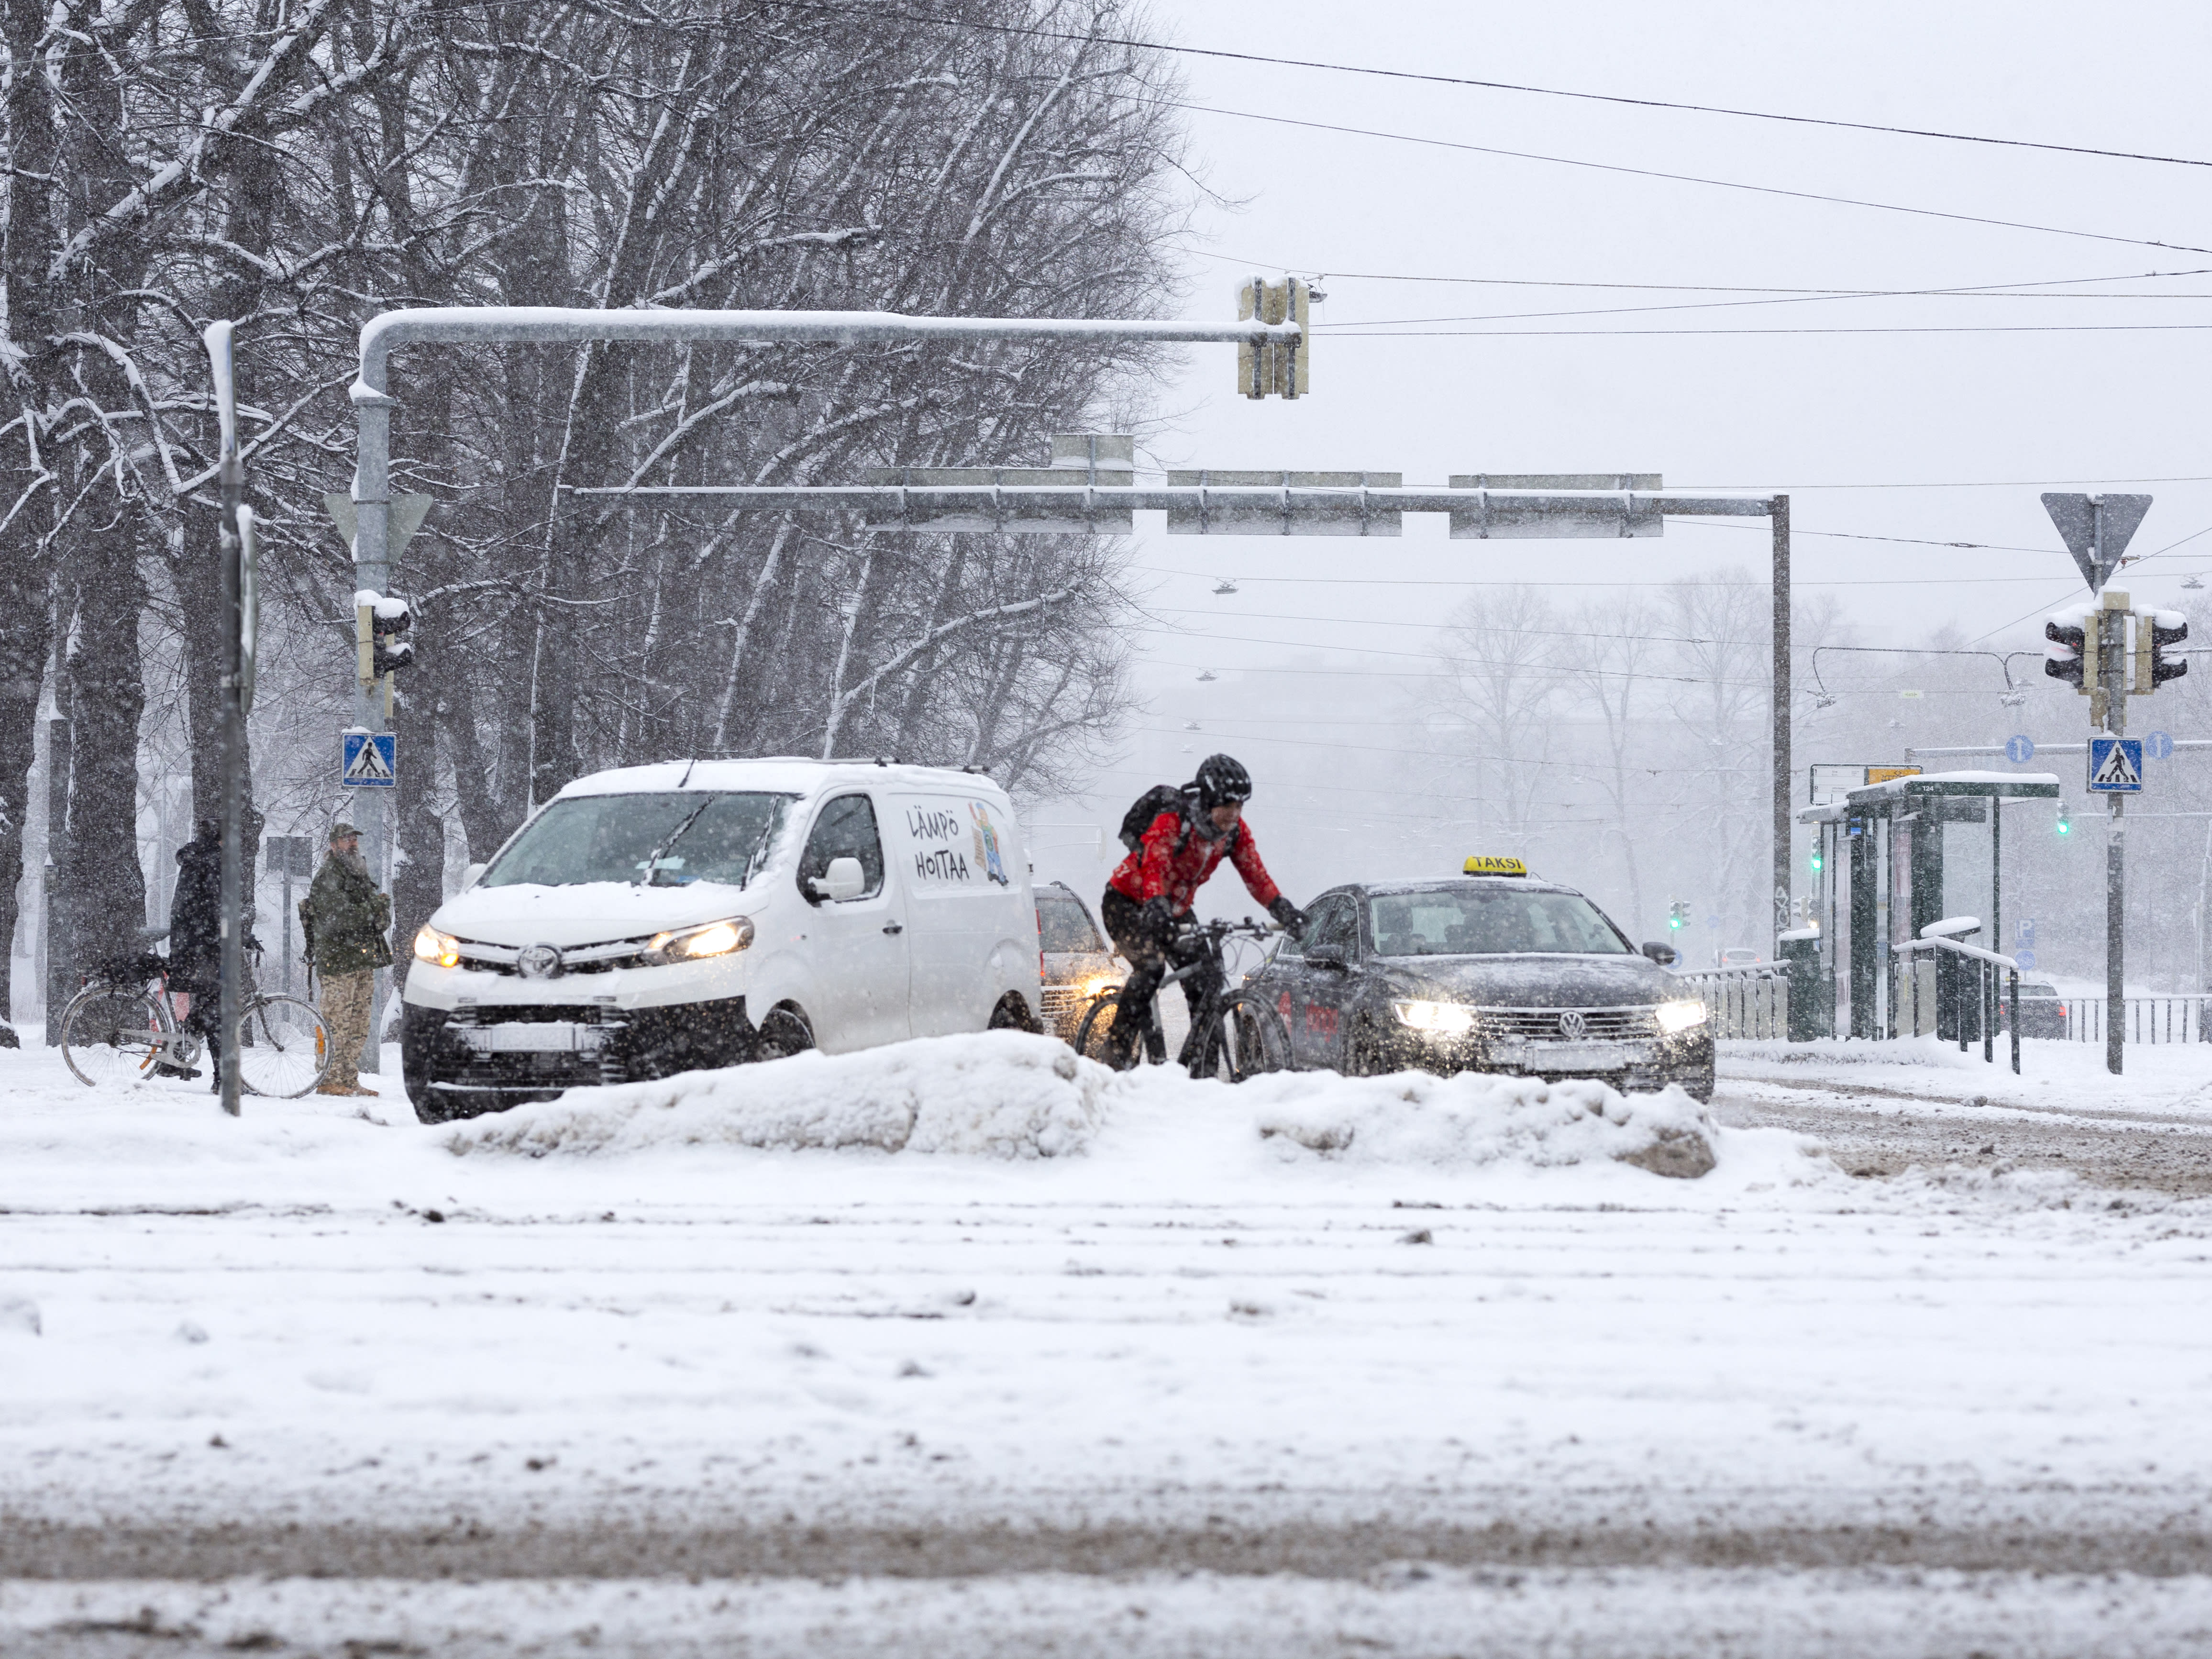 A snowy winter is a foretaste of the future, says Yle’s meteorologist